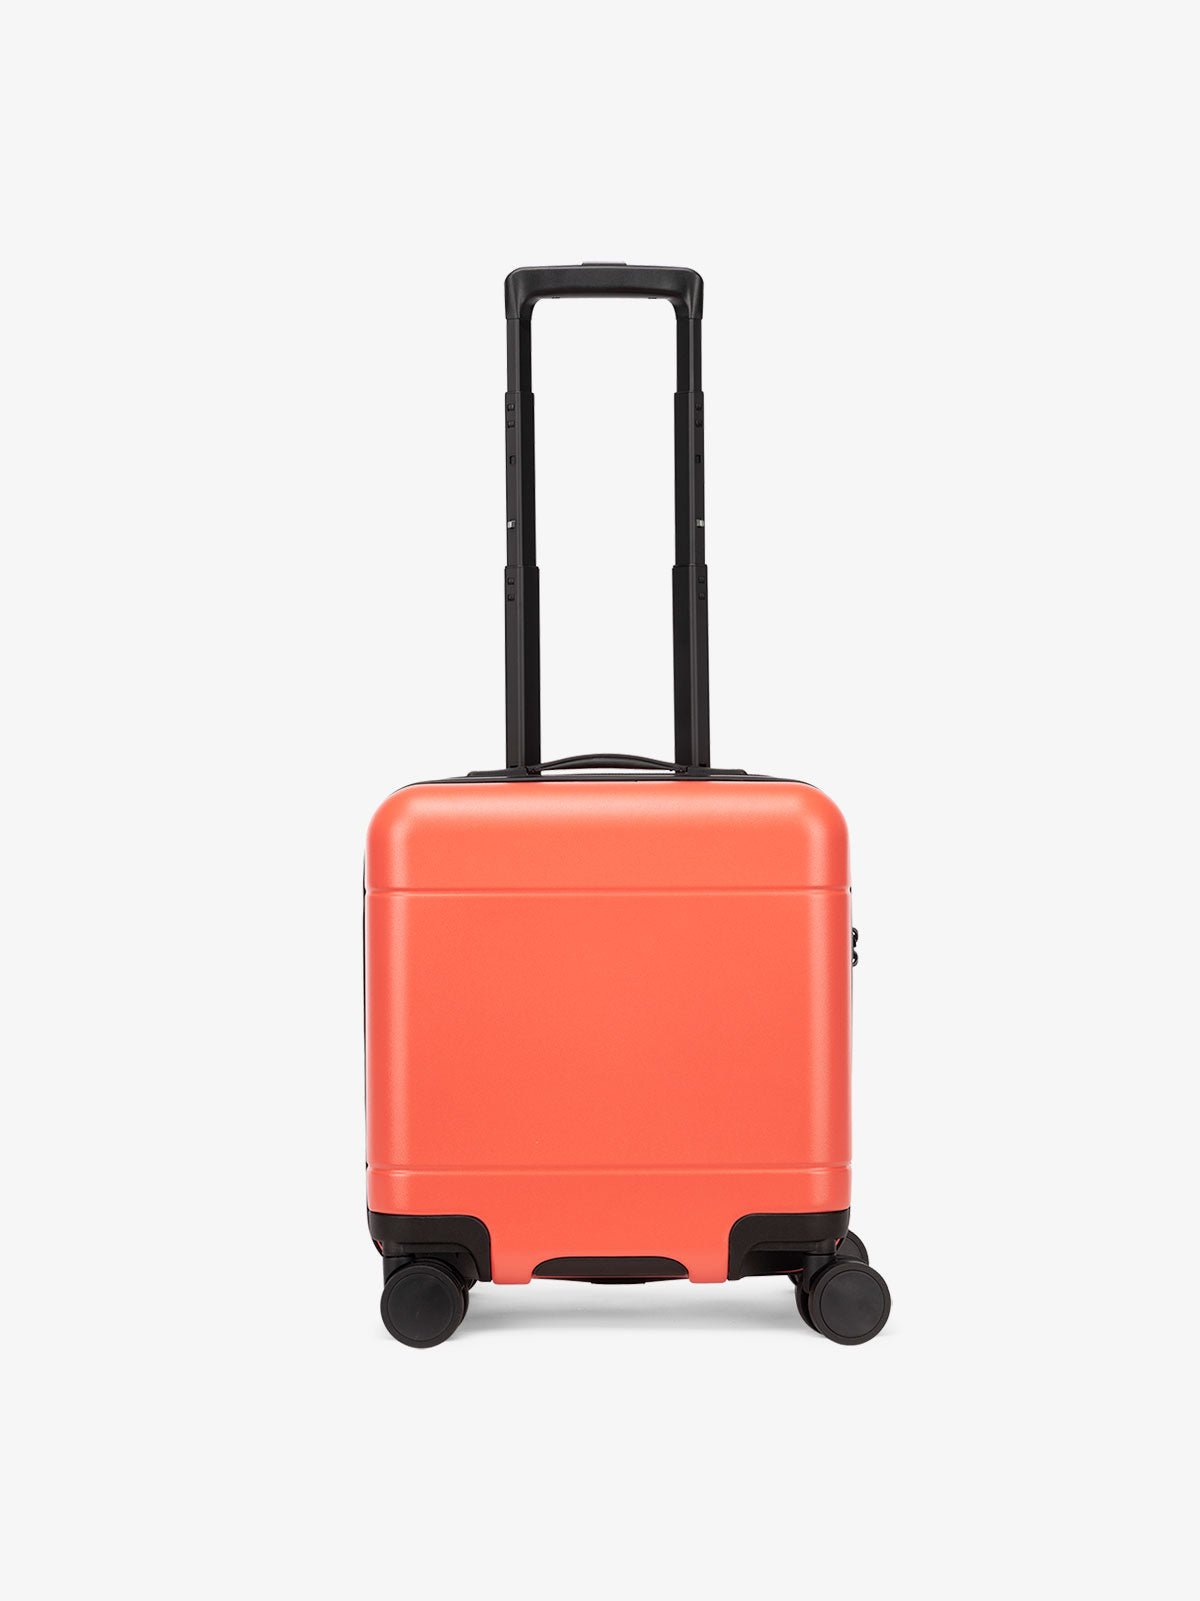 Hue mini carry on luggage in red